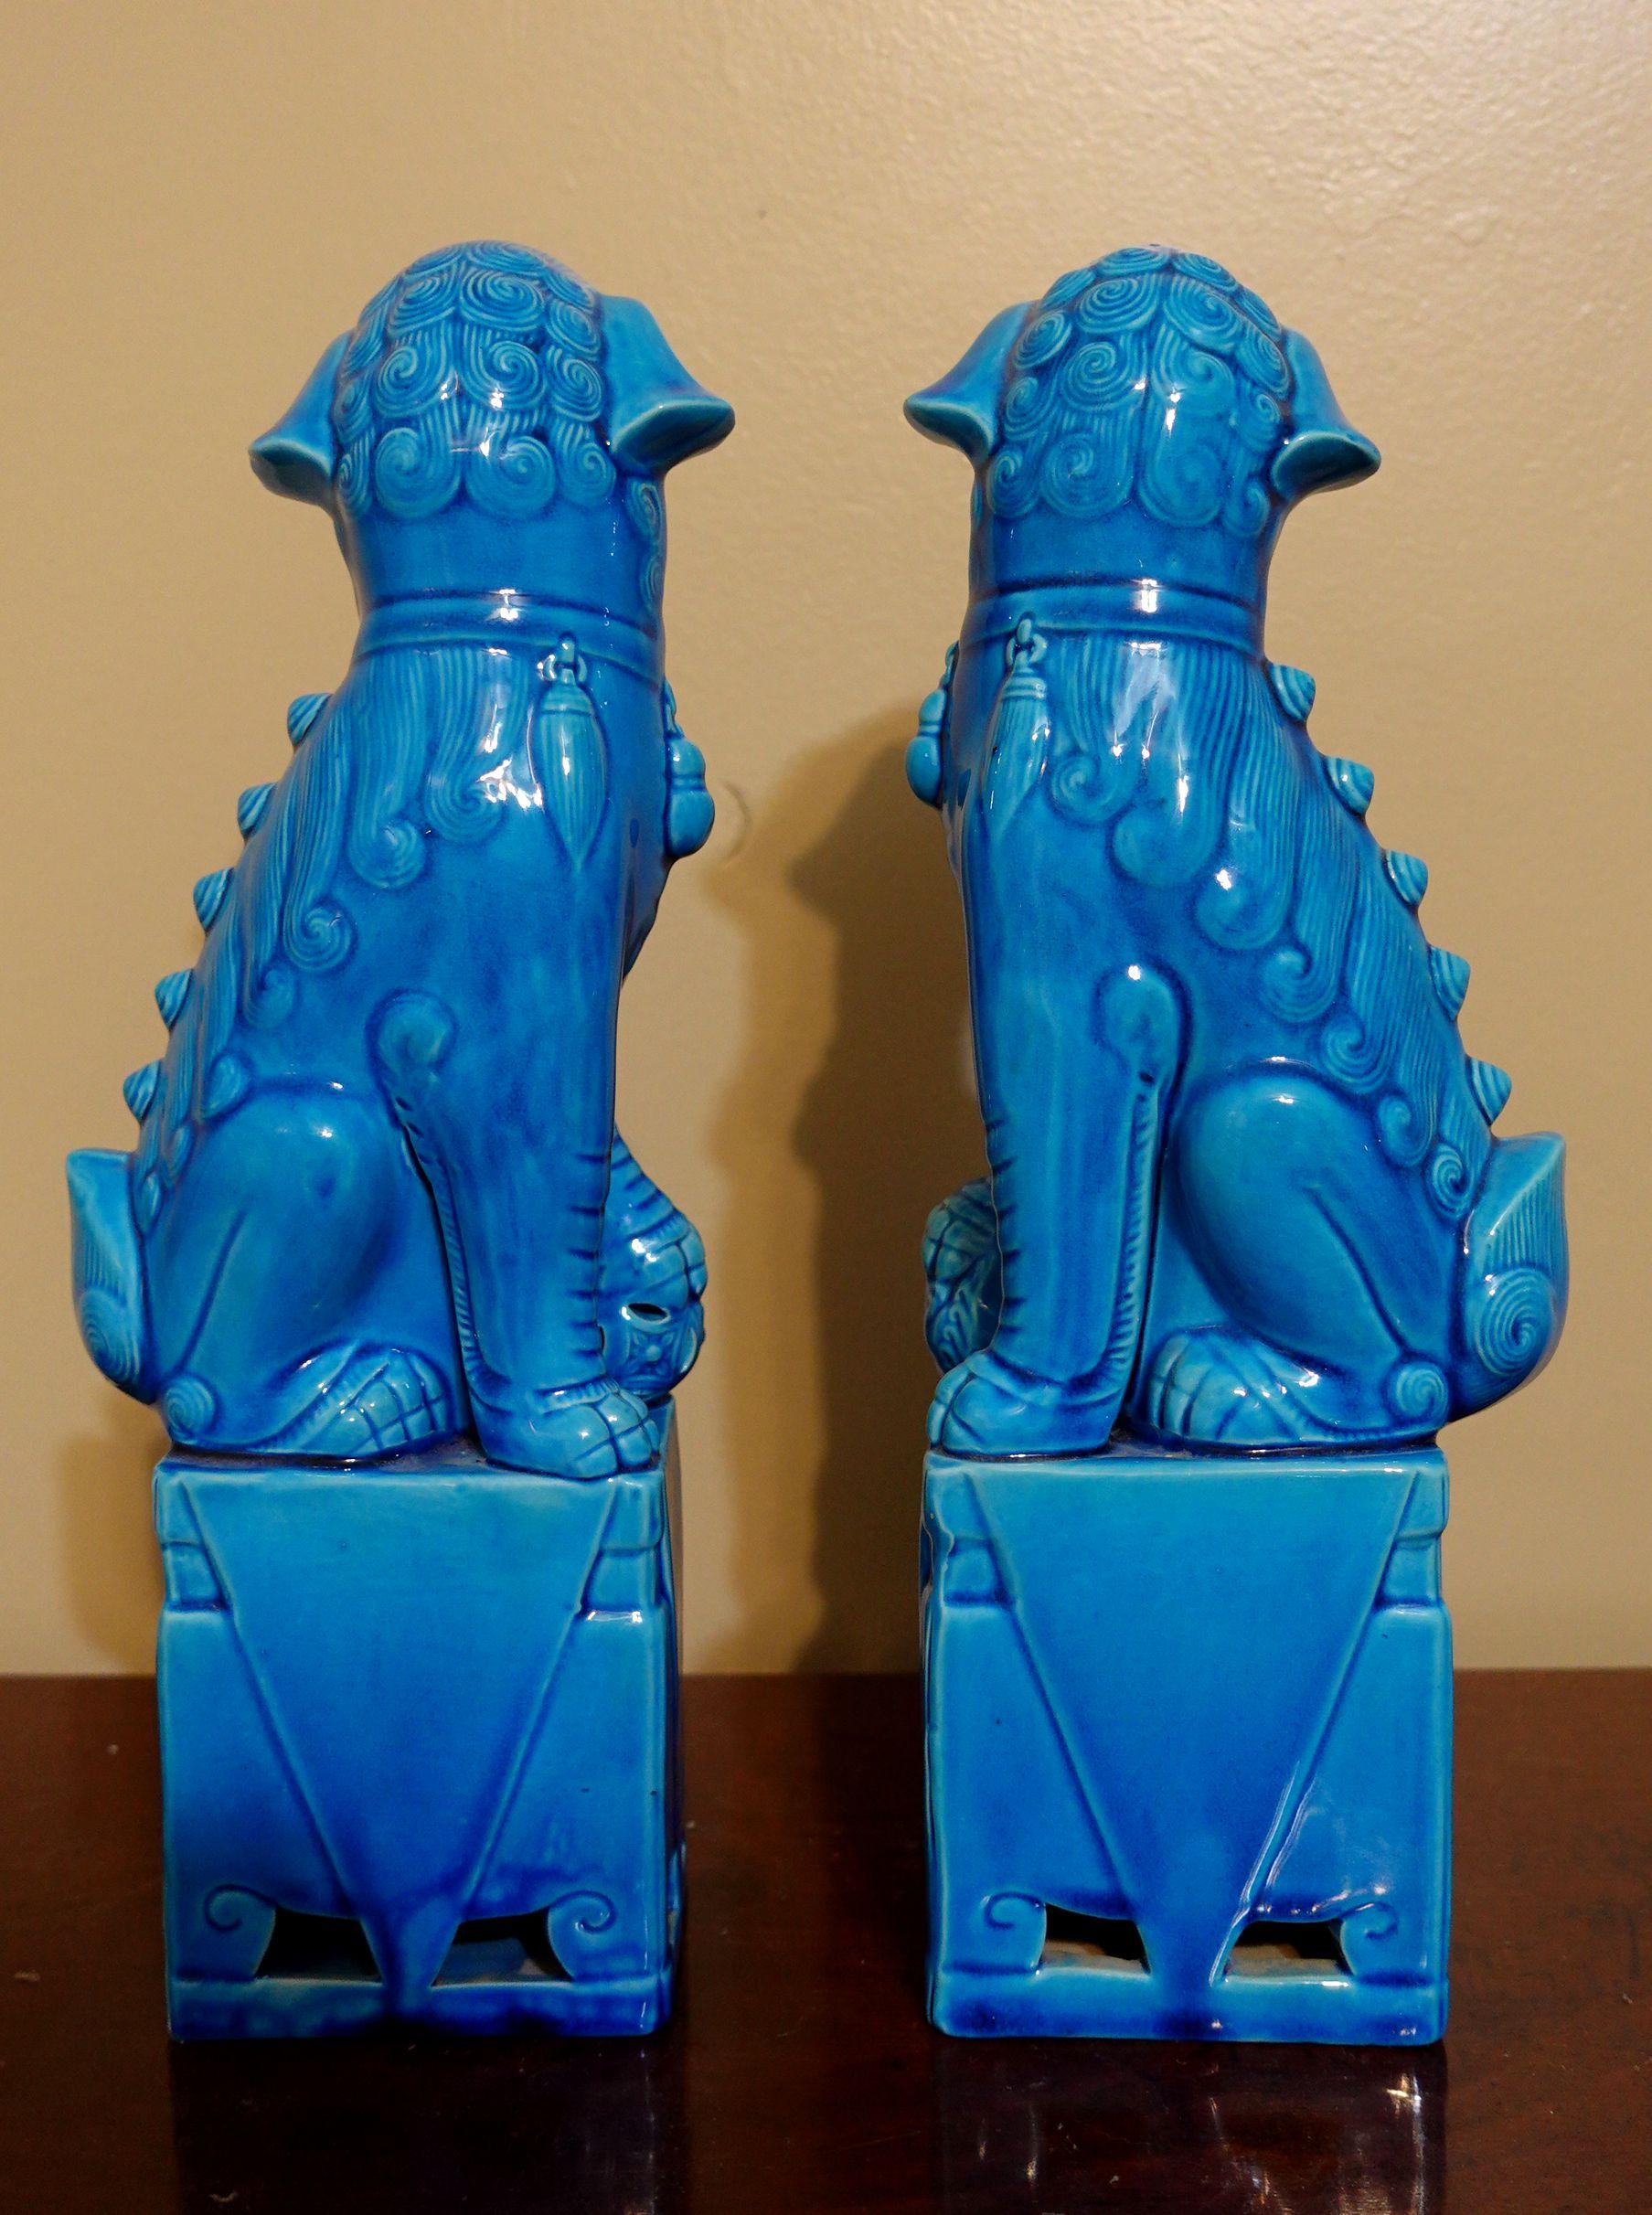  Pair of Large Chinese Turquoise Glazed Porcelain Mounted Foo Dogs For Sale 2